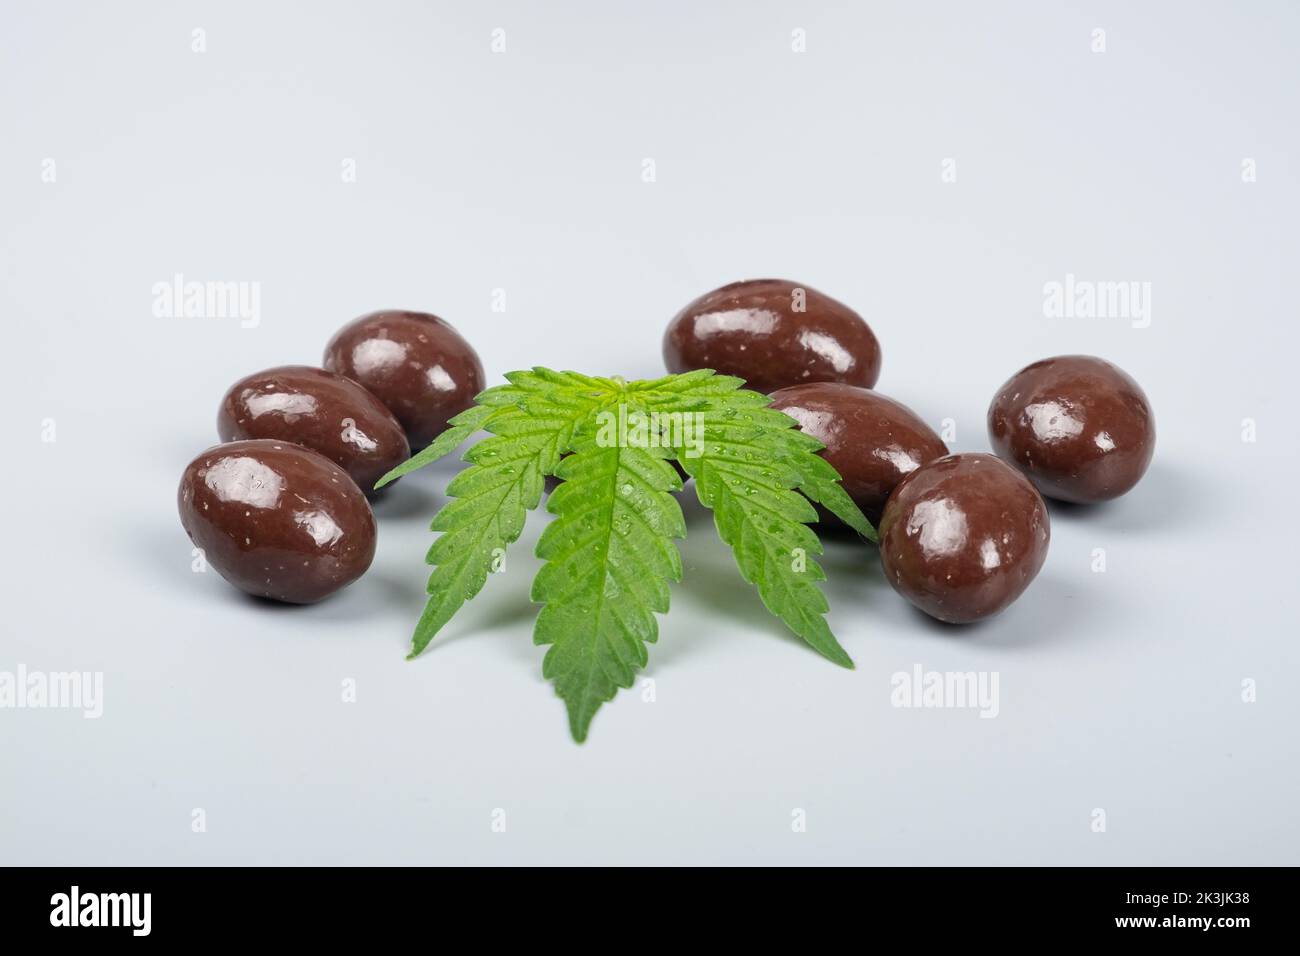 chocolate candies with thc and cbd, recreational drugs and green marijuana leaf. Stock Photo